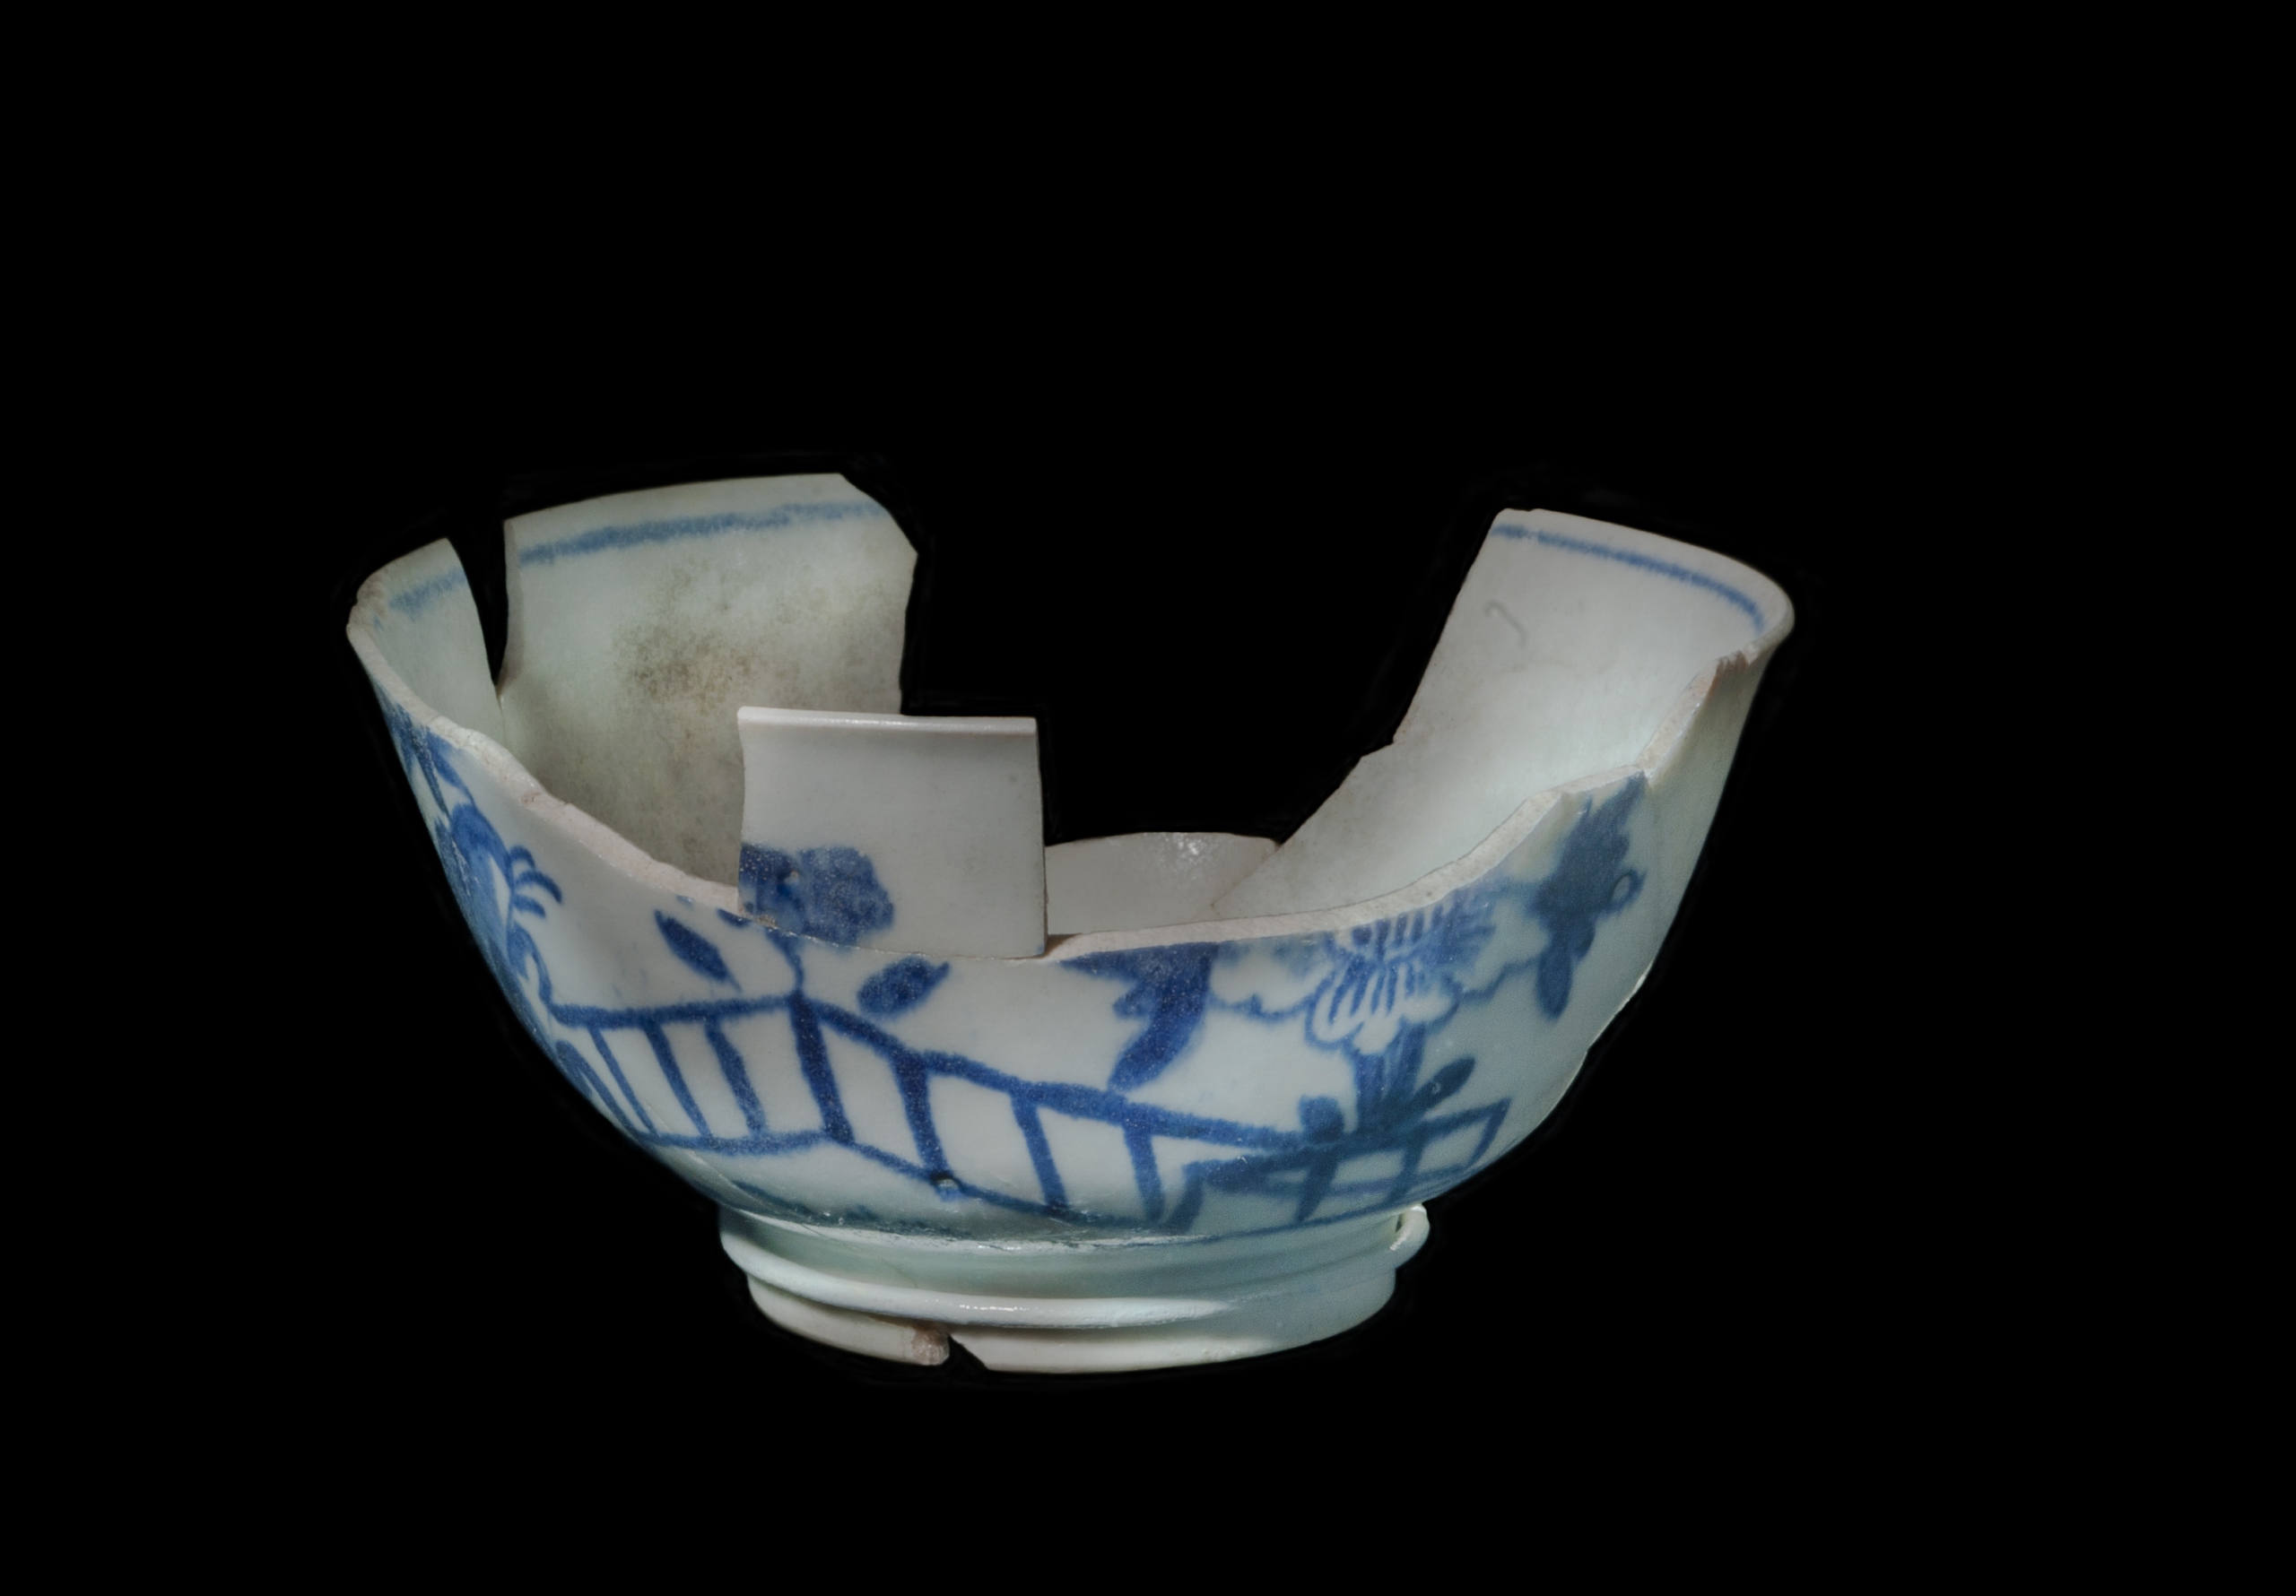 Image of a broken antique blue and white china teacup